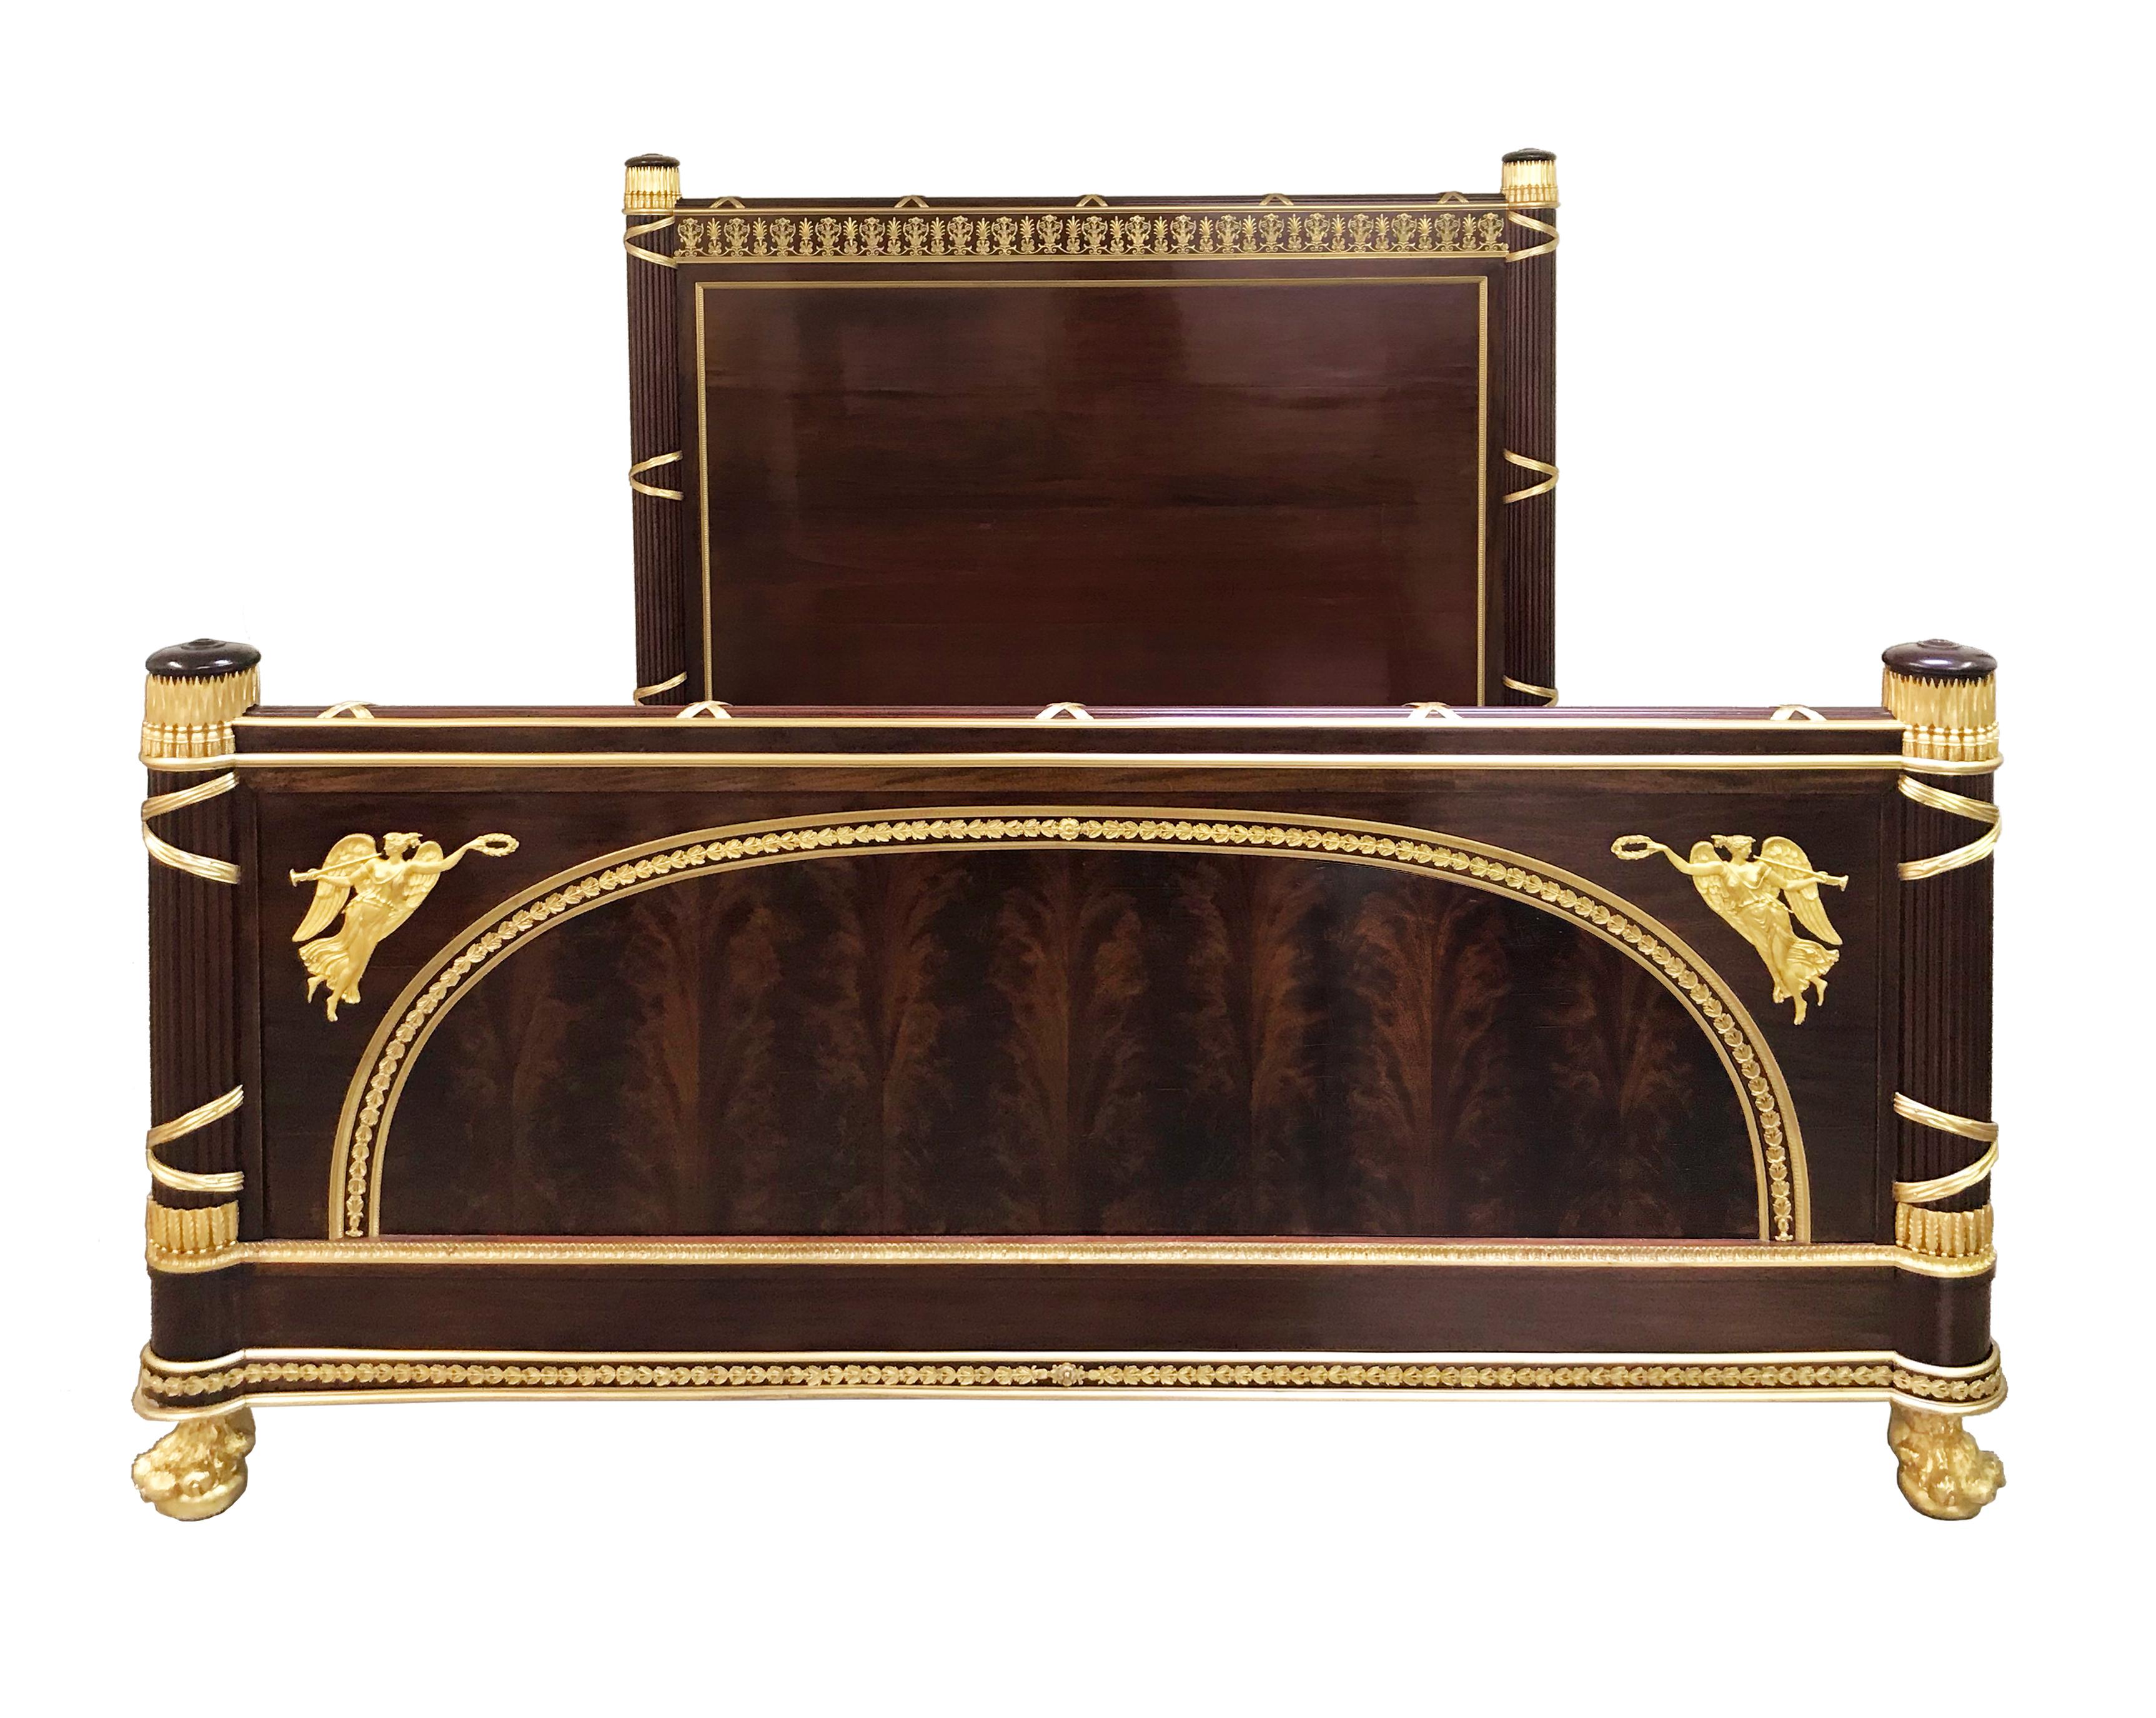 Empire style mahogany and ormolu king size bed by Joseph-Emmanuel Zwiener
circa Last quarter of the 19th century.
Fine gilded bronzes with two tones of gilding, neoclassical Empire style motifs throughout the design, the four posts resembling